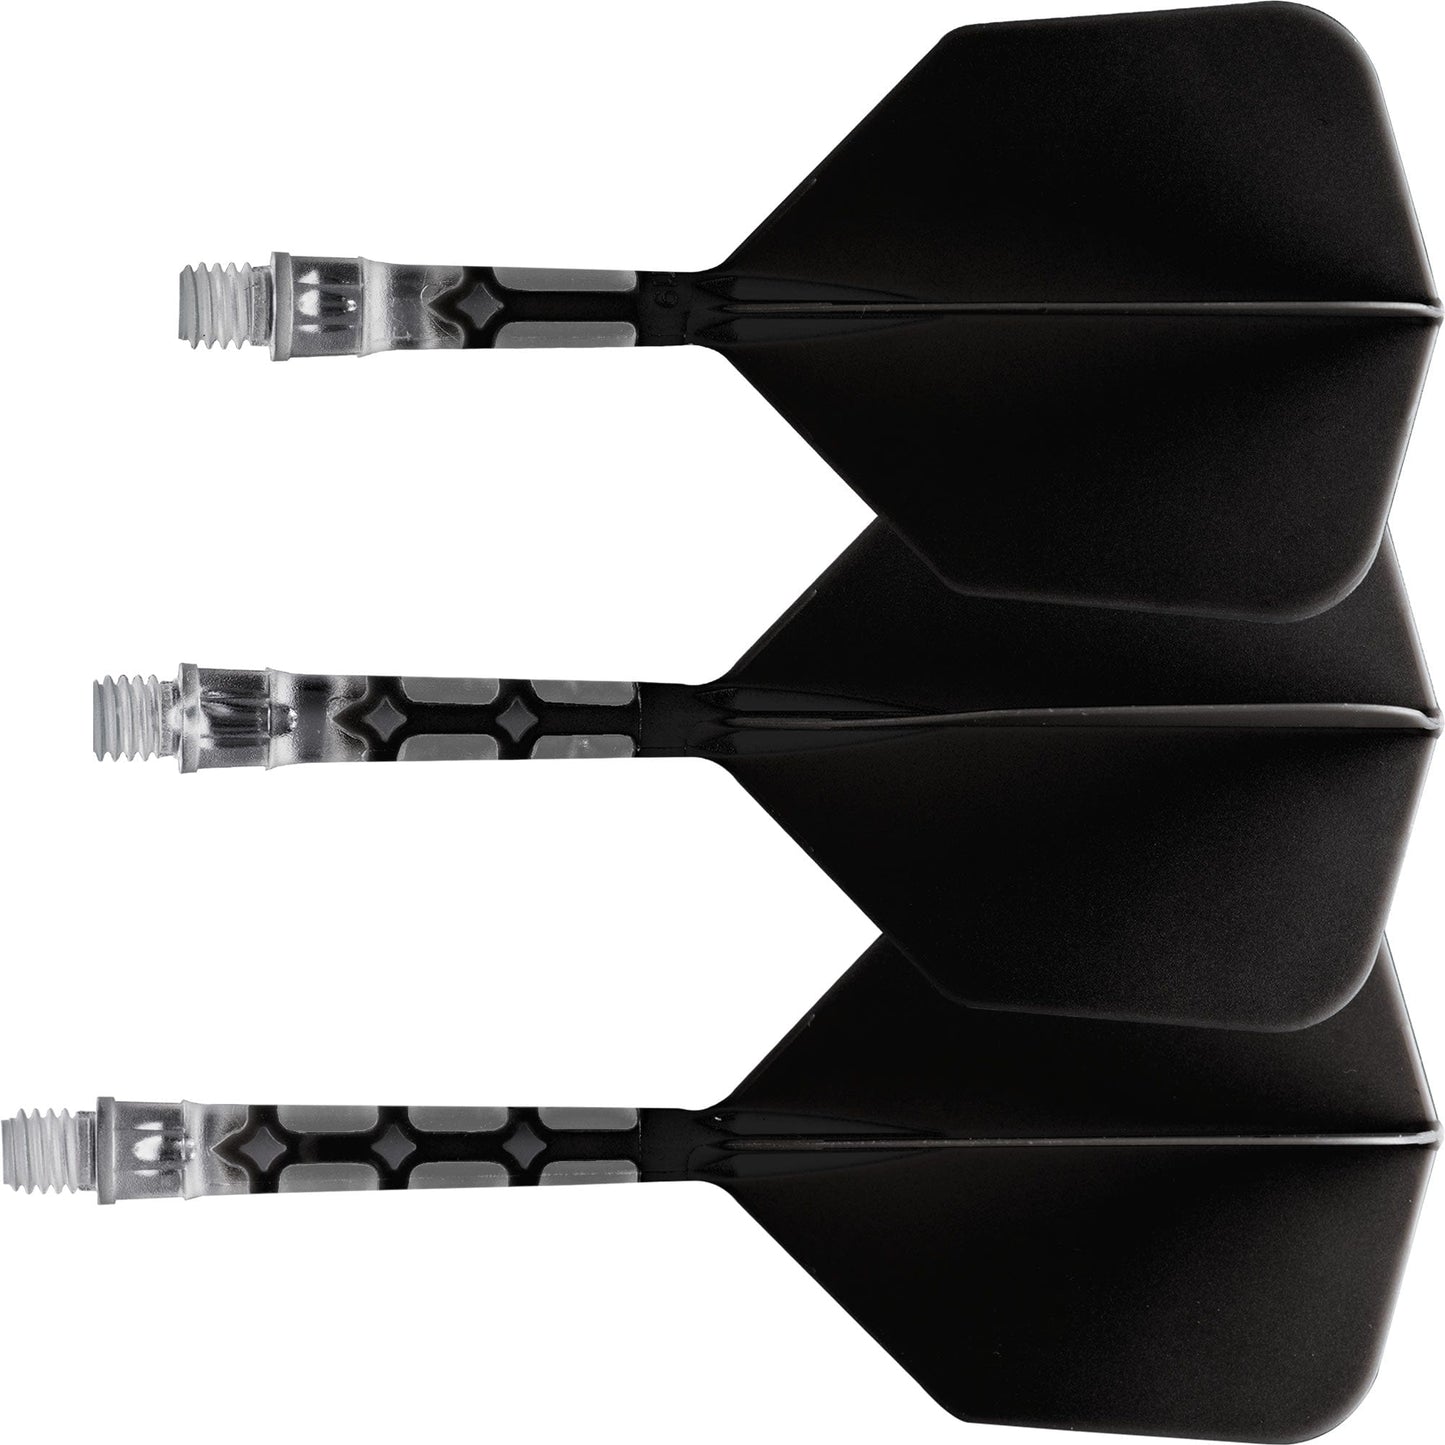 Cuesoul Rost T19 Integrated Dart Shaft and Flights - Big Wing - Clear with Black Flight